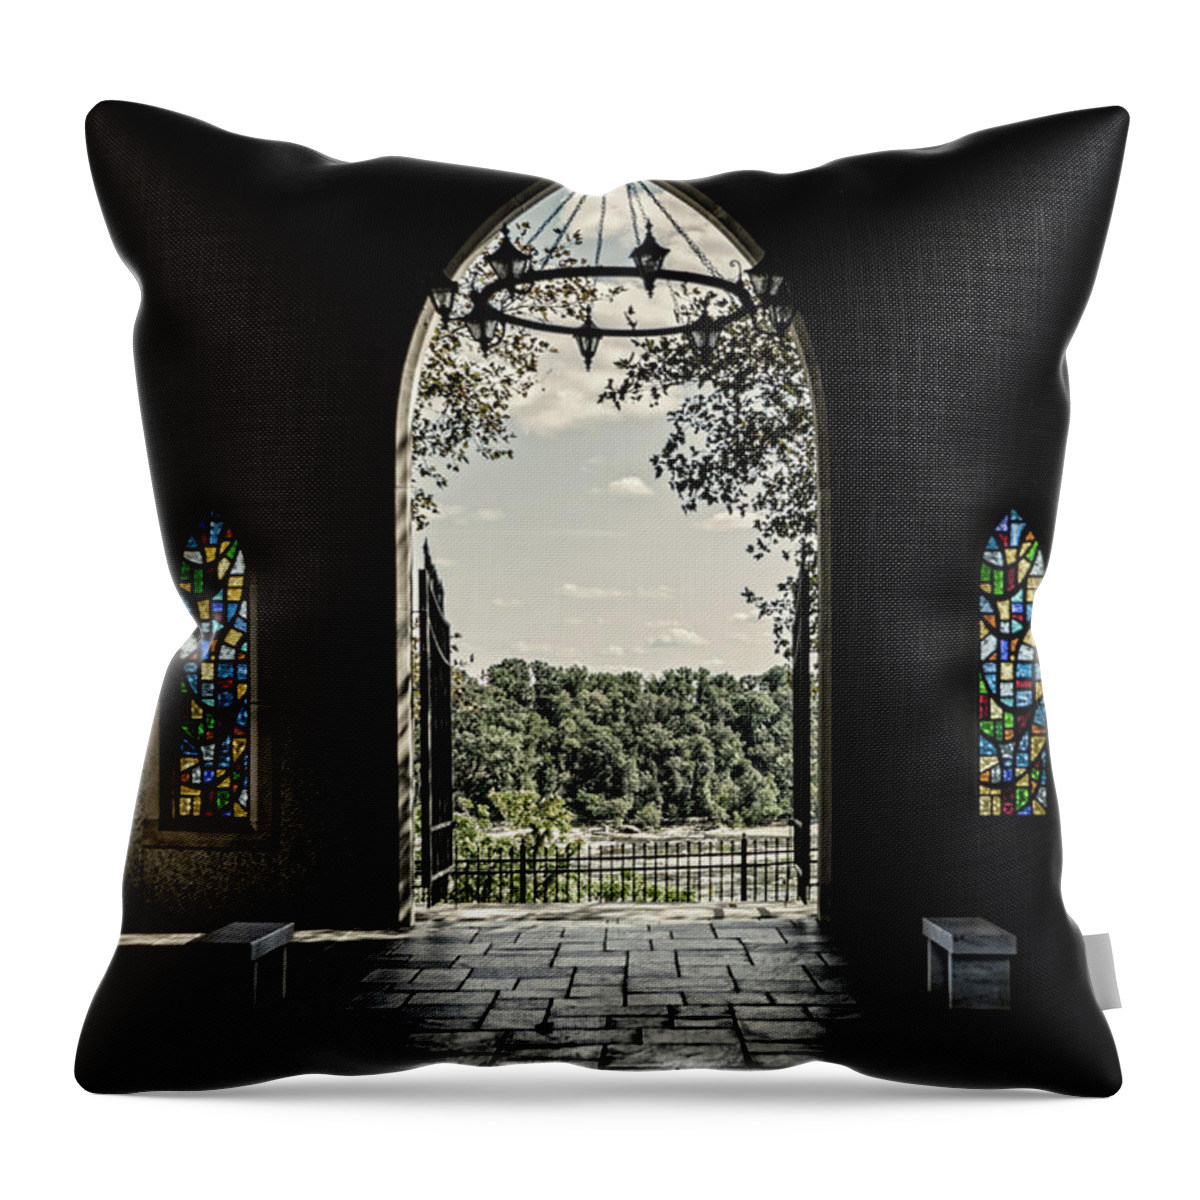 Hollywood Cemetery Throw Pillow featuring the photograph Peaceful Resting by Sharon Popek